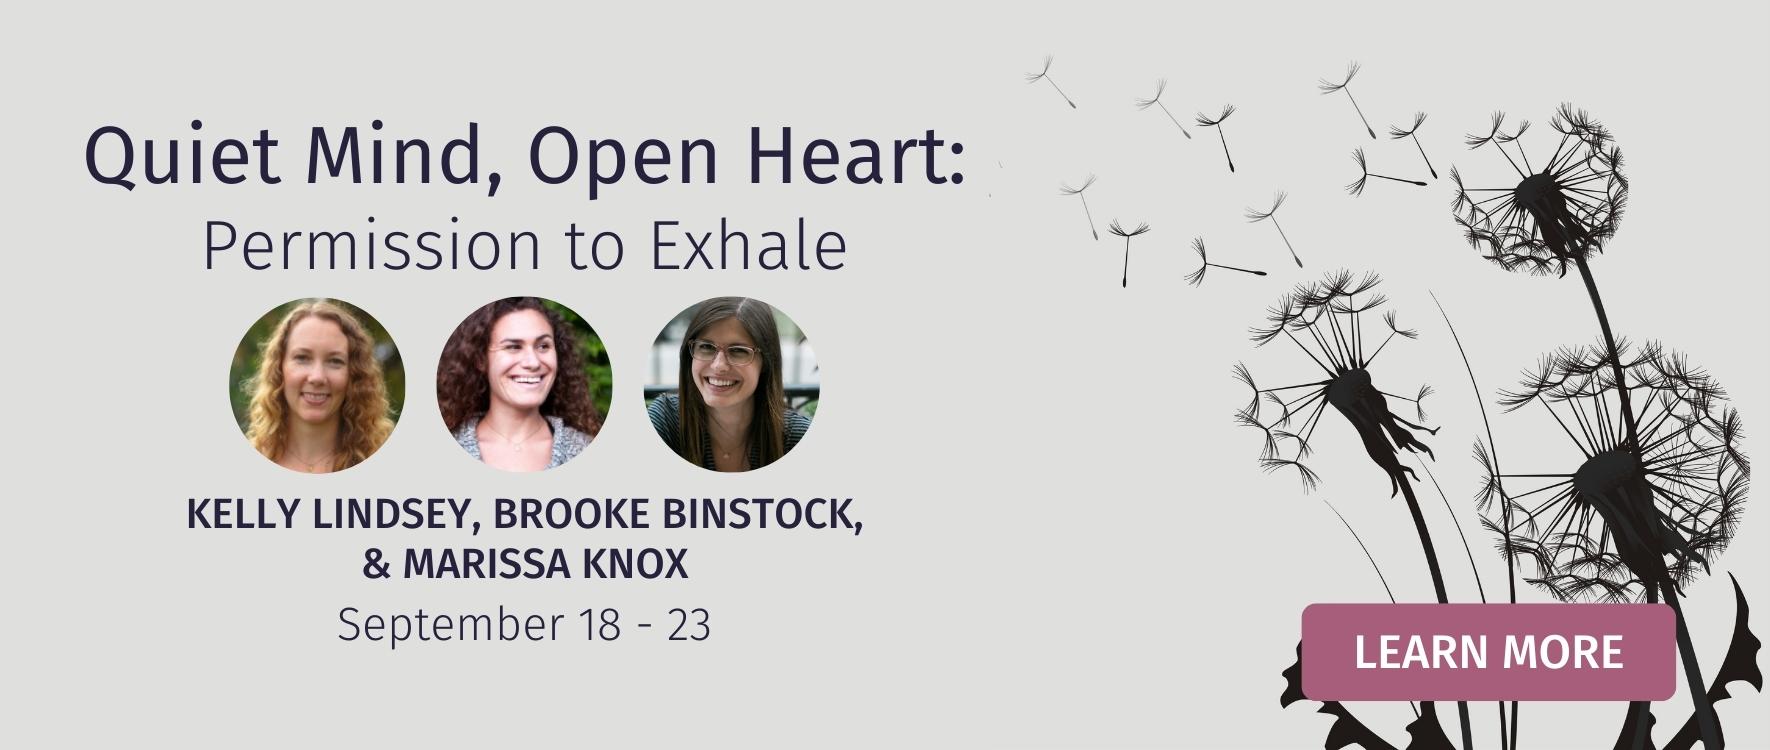 Learn More about Quiet Mind, Open Heart: Permission to Exhale Retreat at Drala Mountain Center